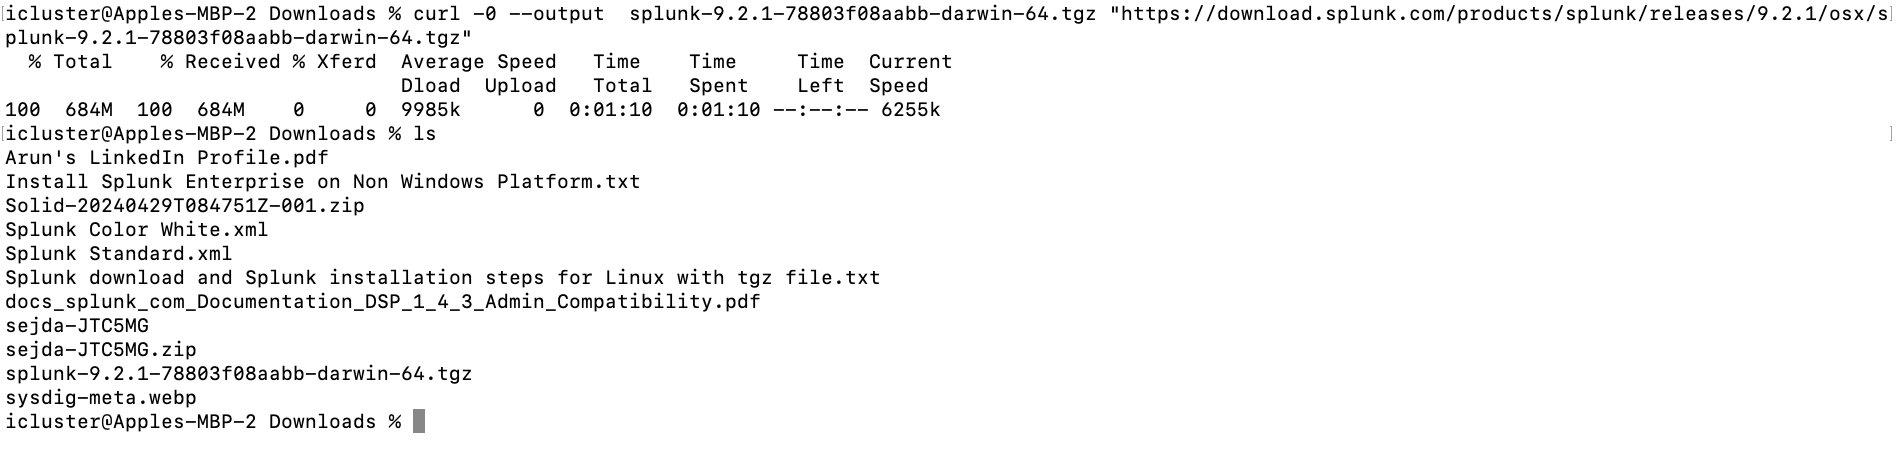 Terminal output showing curl command downloading splunk-9.2.1-78803f08aabb-darwin-64.tgz file with download progress details like speed, time, and file size.